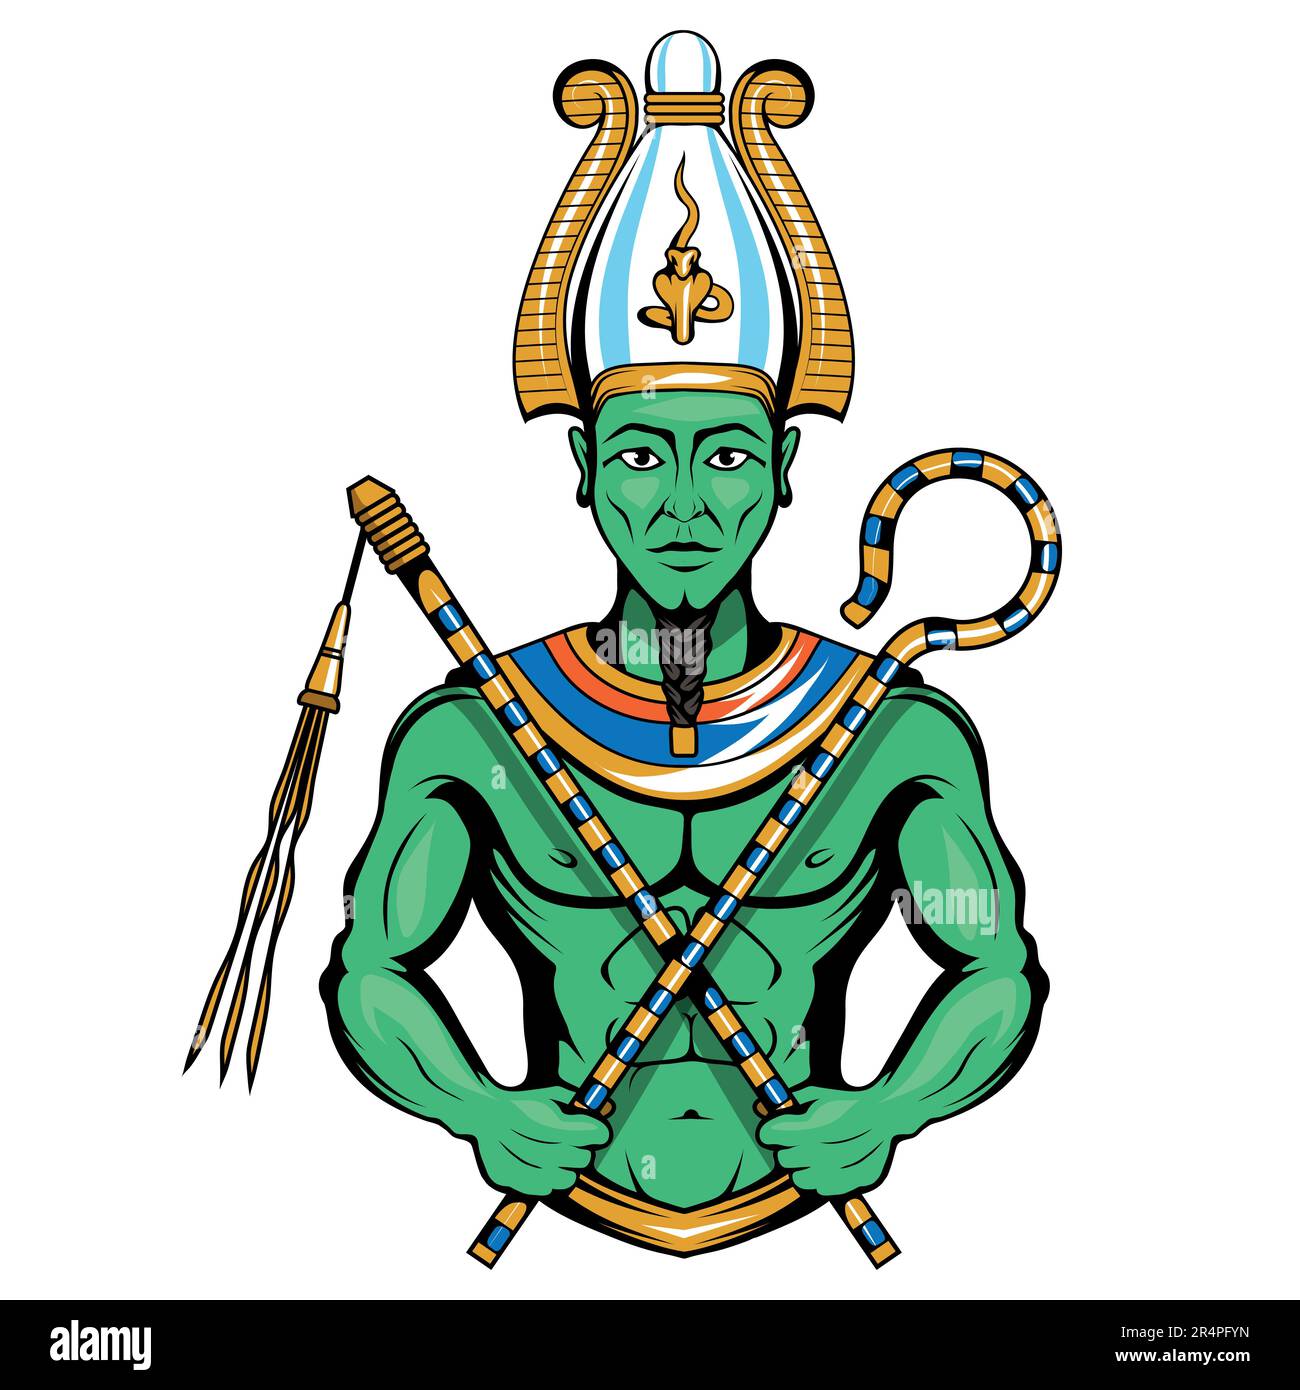 Osiris Vector Illustration Of A Ancient Egyptian God Lord Of The Dead And Reborn With Green